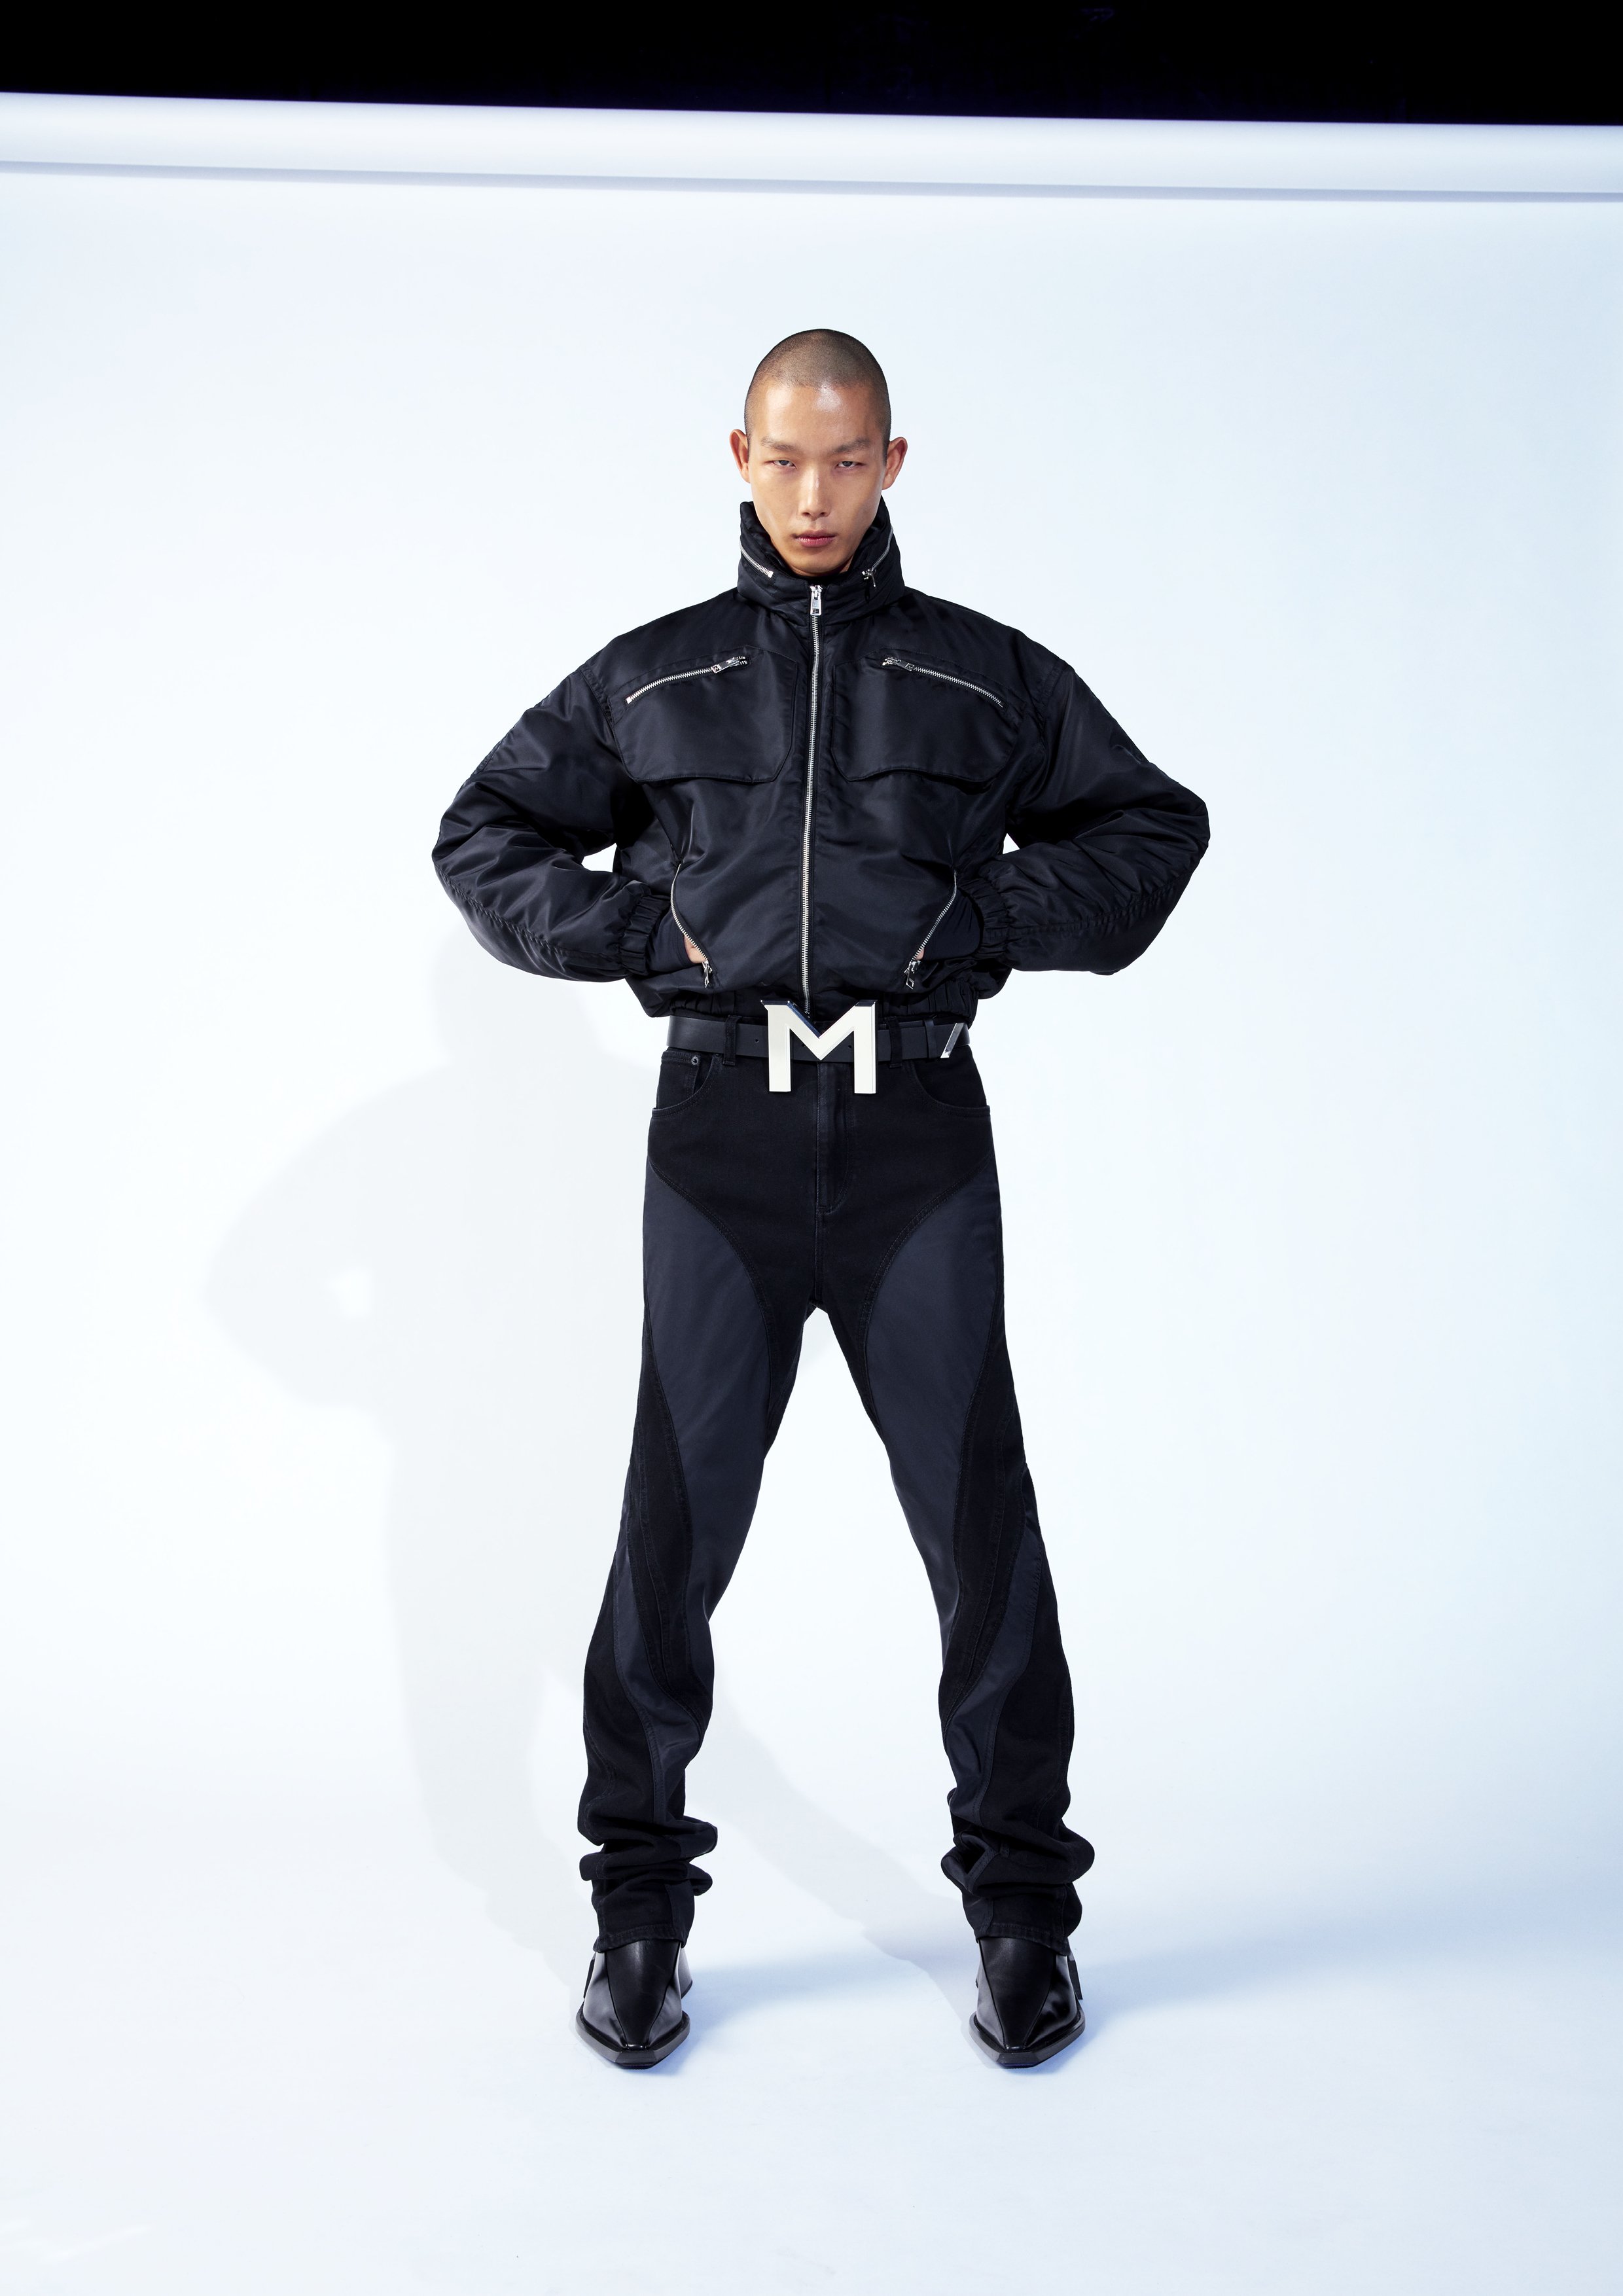 Presenting The Full Mugler H&amp;M Collection